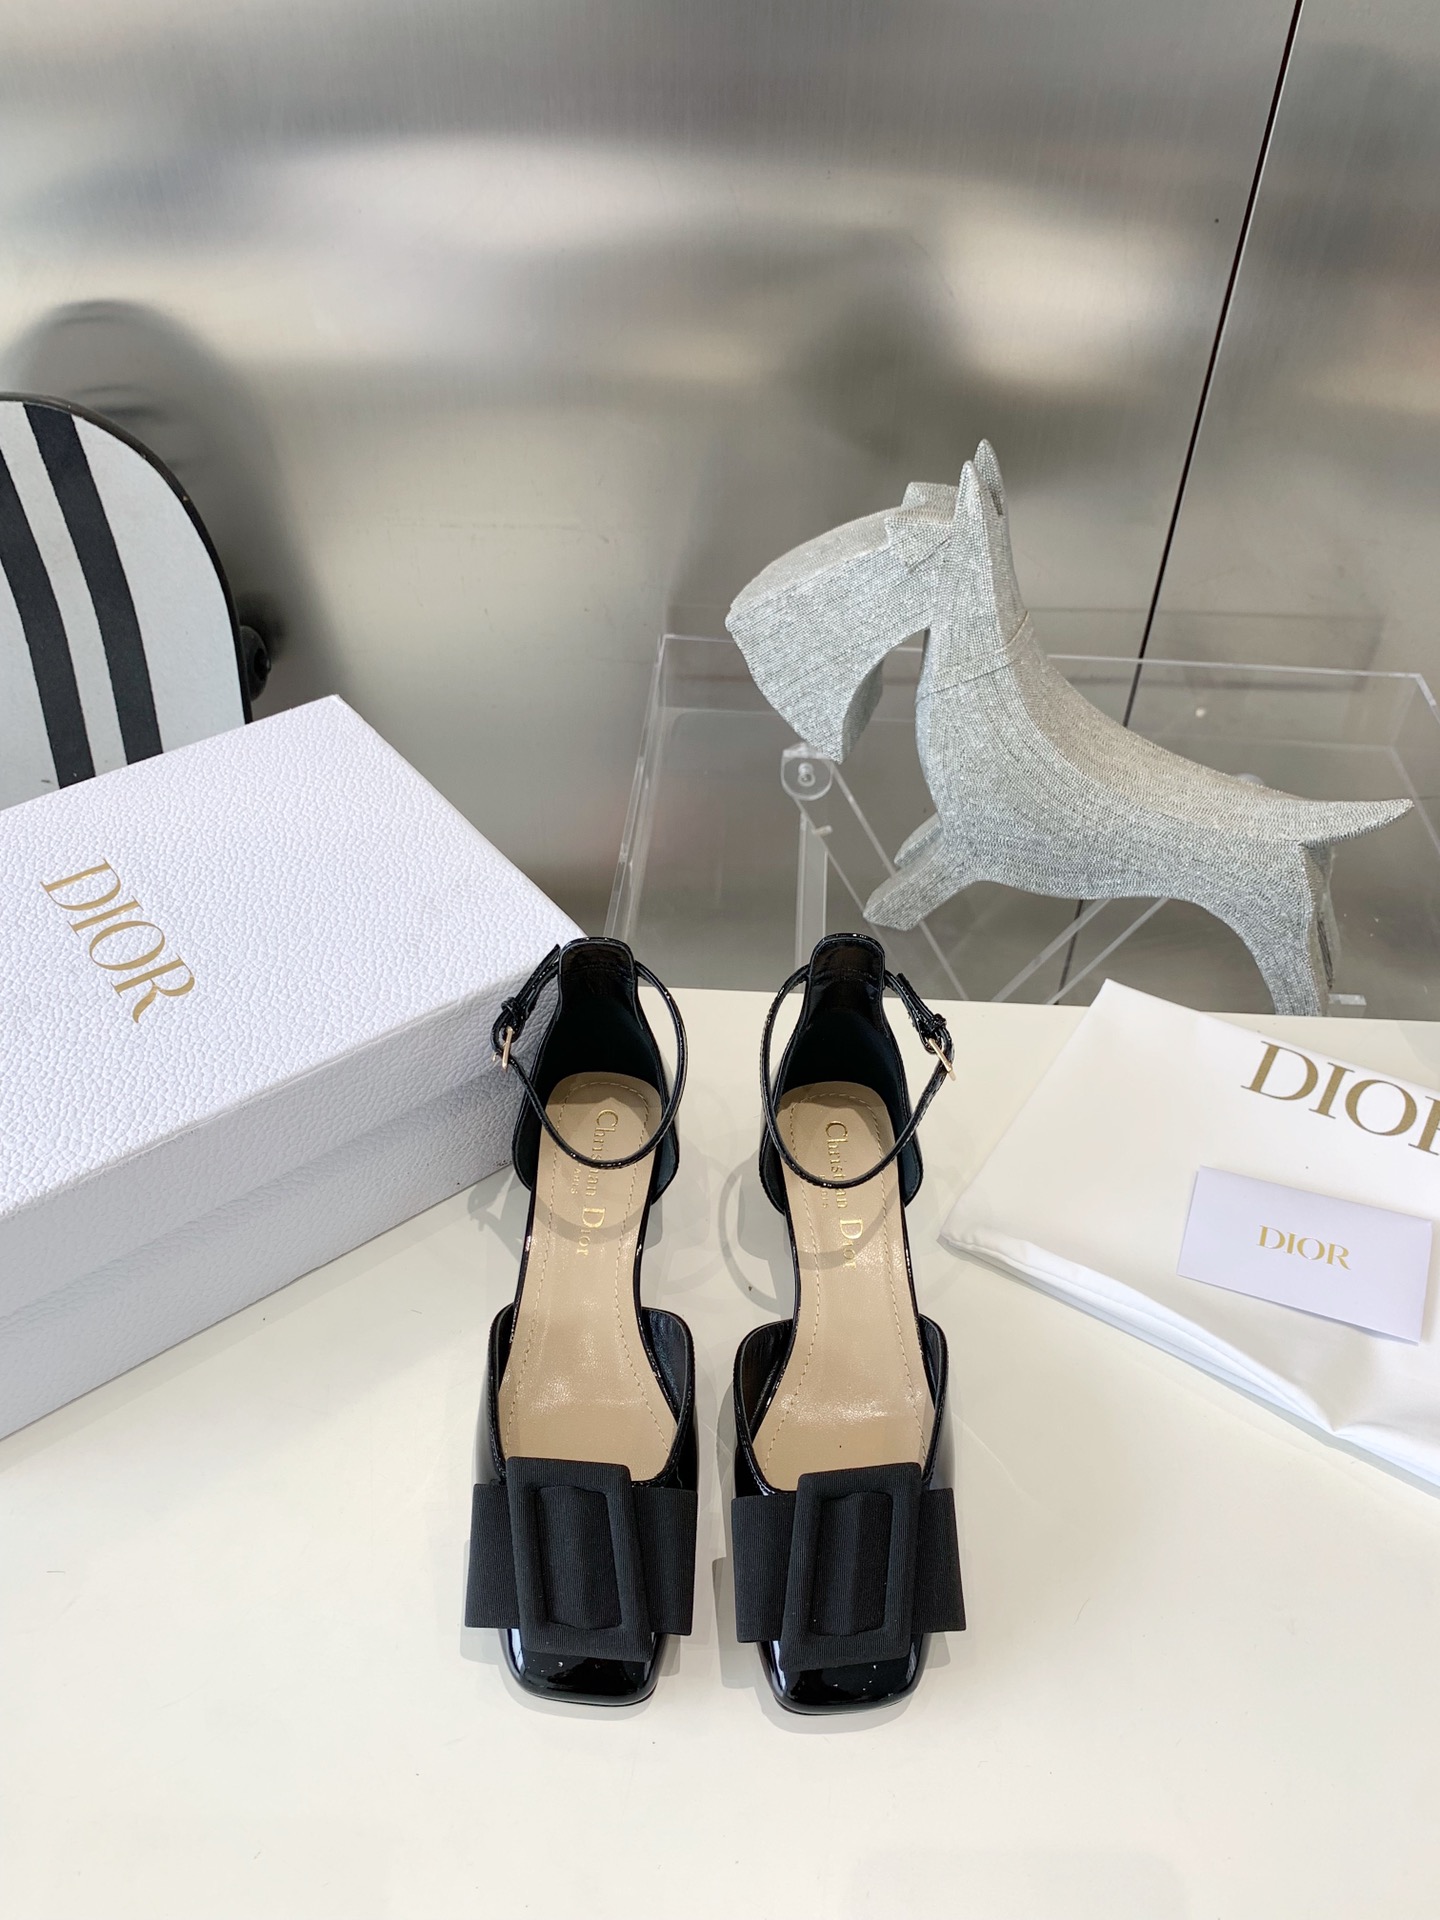 Dior Shoes Slippers Cowhide Lambskin Patent Leather Sheepskin Spring/Summer Collection